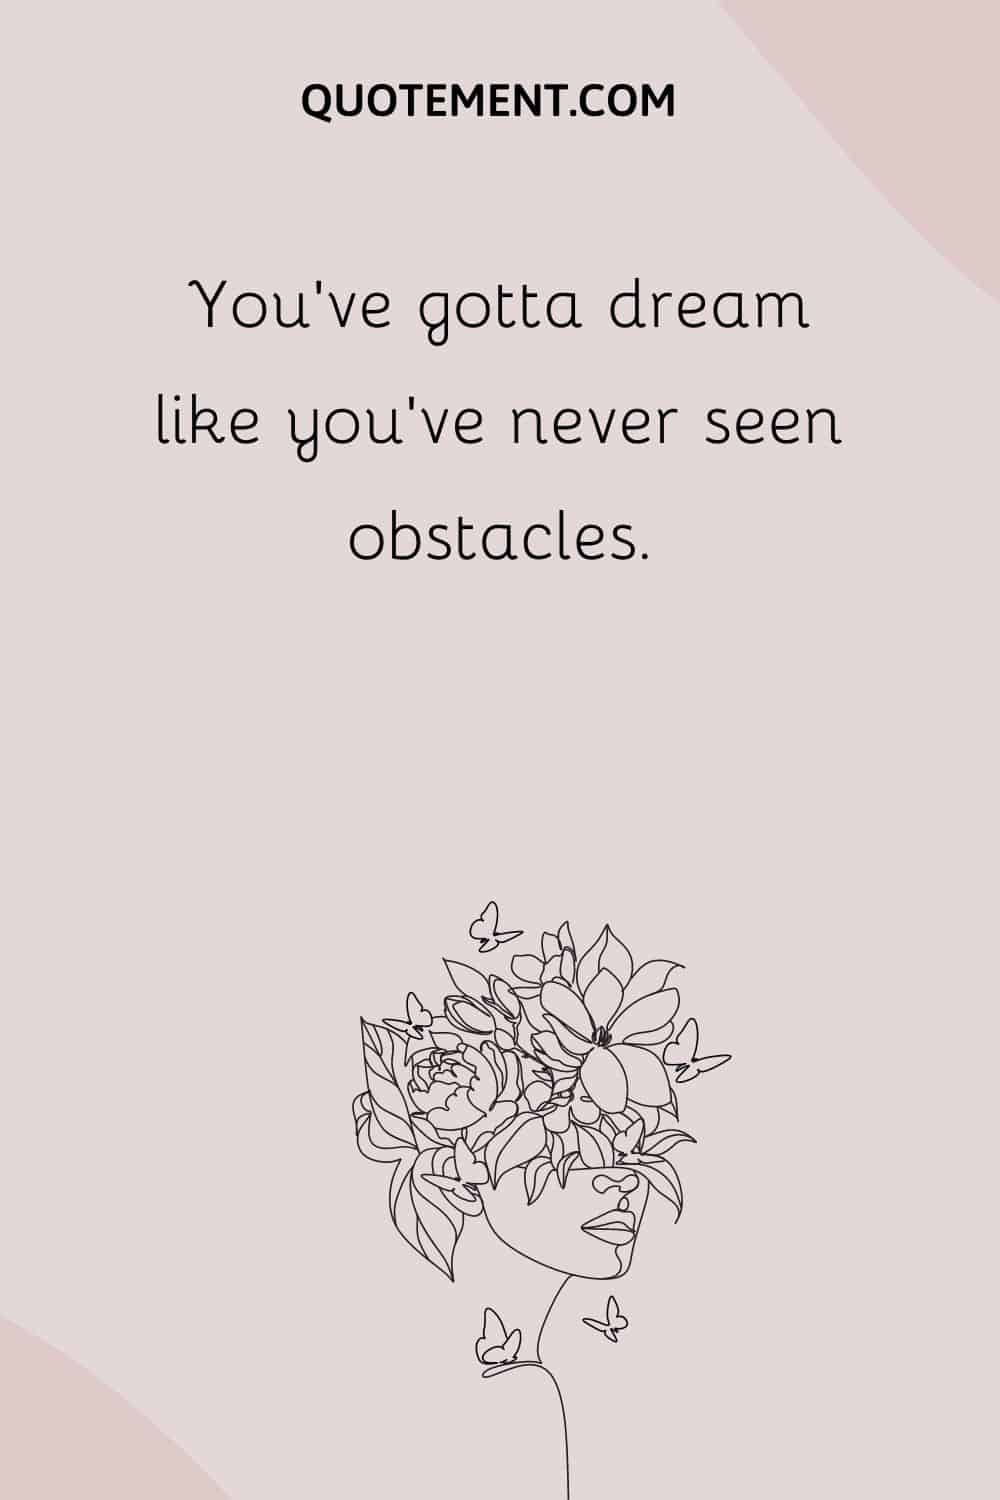 You’ve gotta dream like you’ve never seen obstacles.